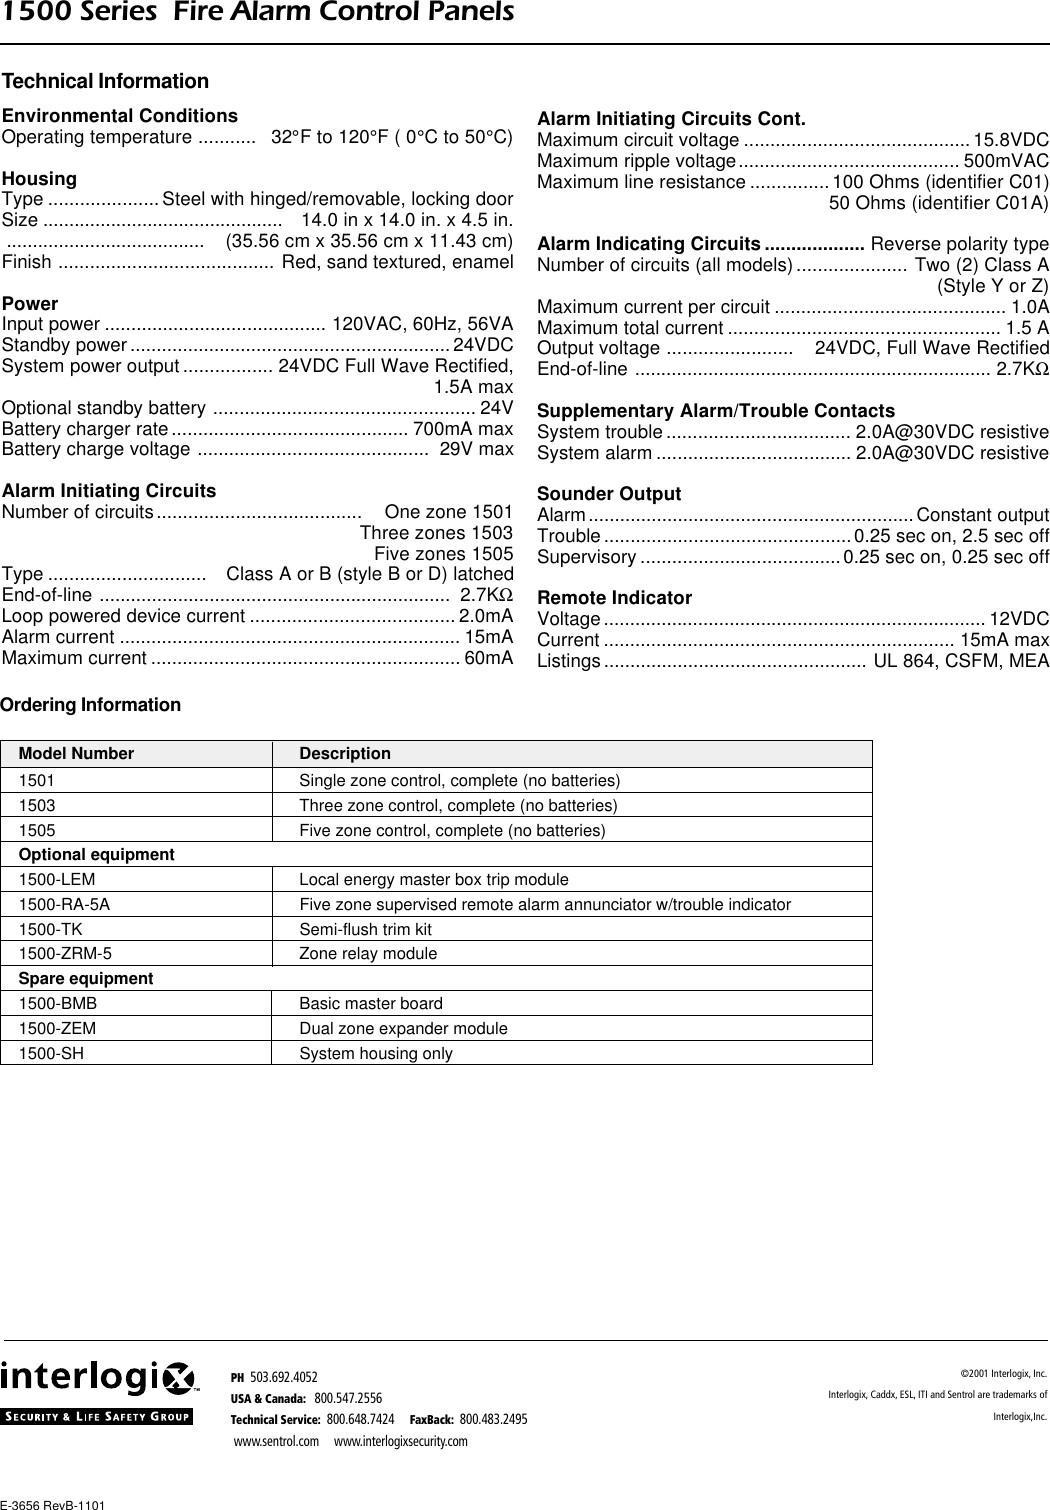 Page 4 of 4 - ESL 1500 Series Fire Alarm Control Panel Data Sheet 2001